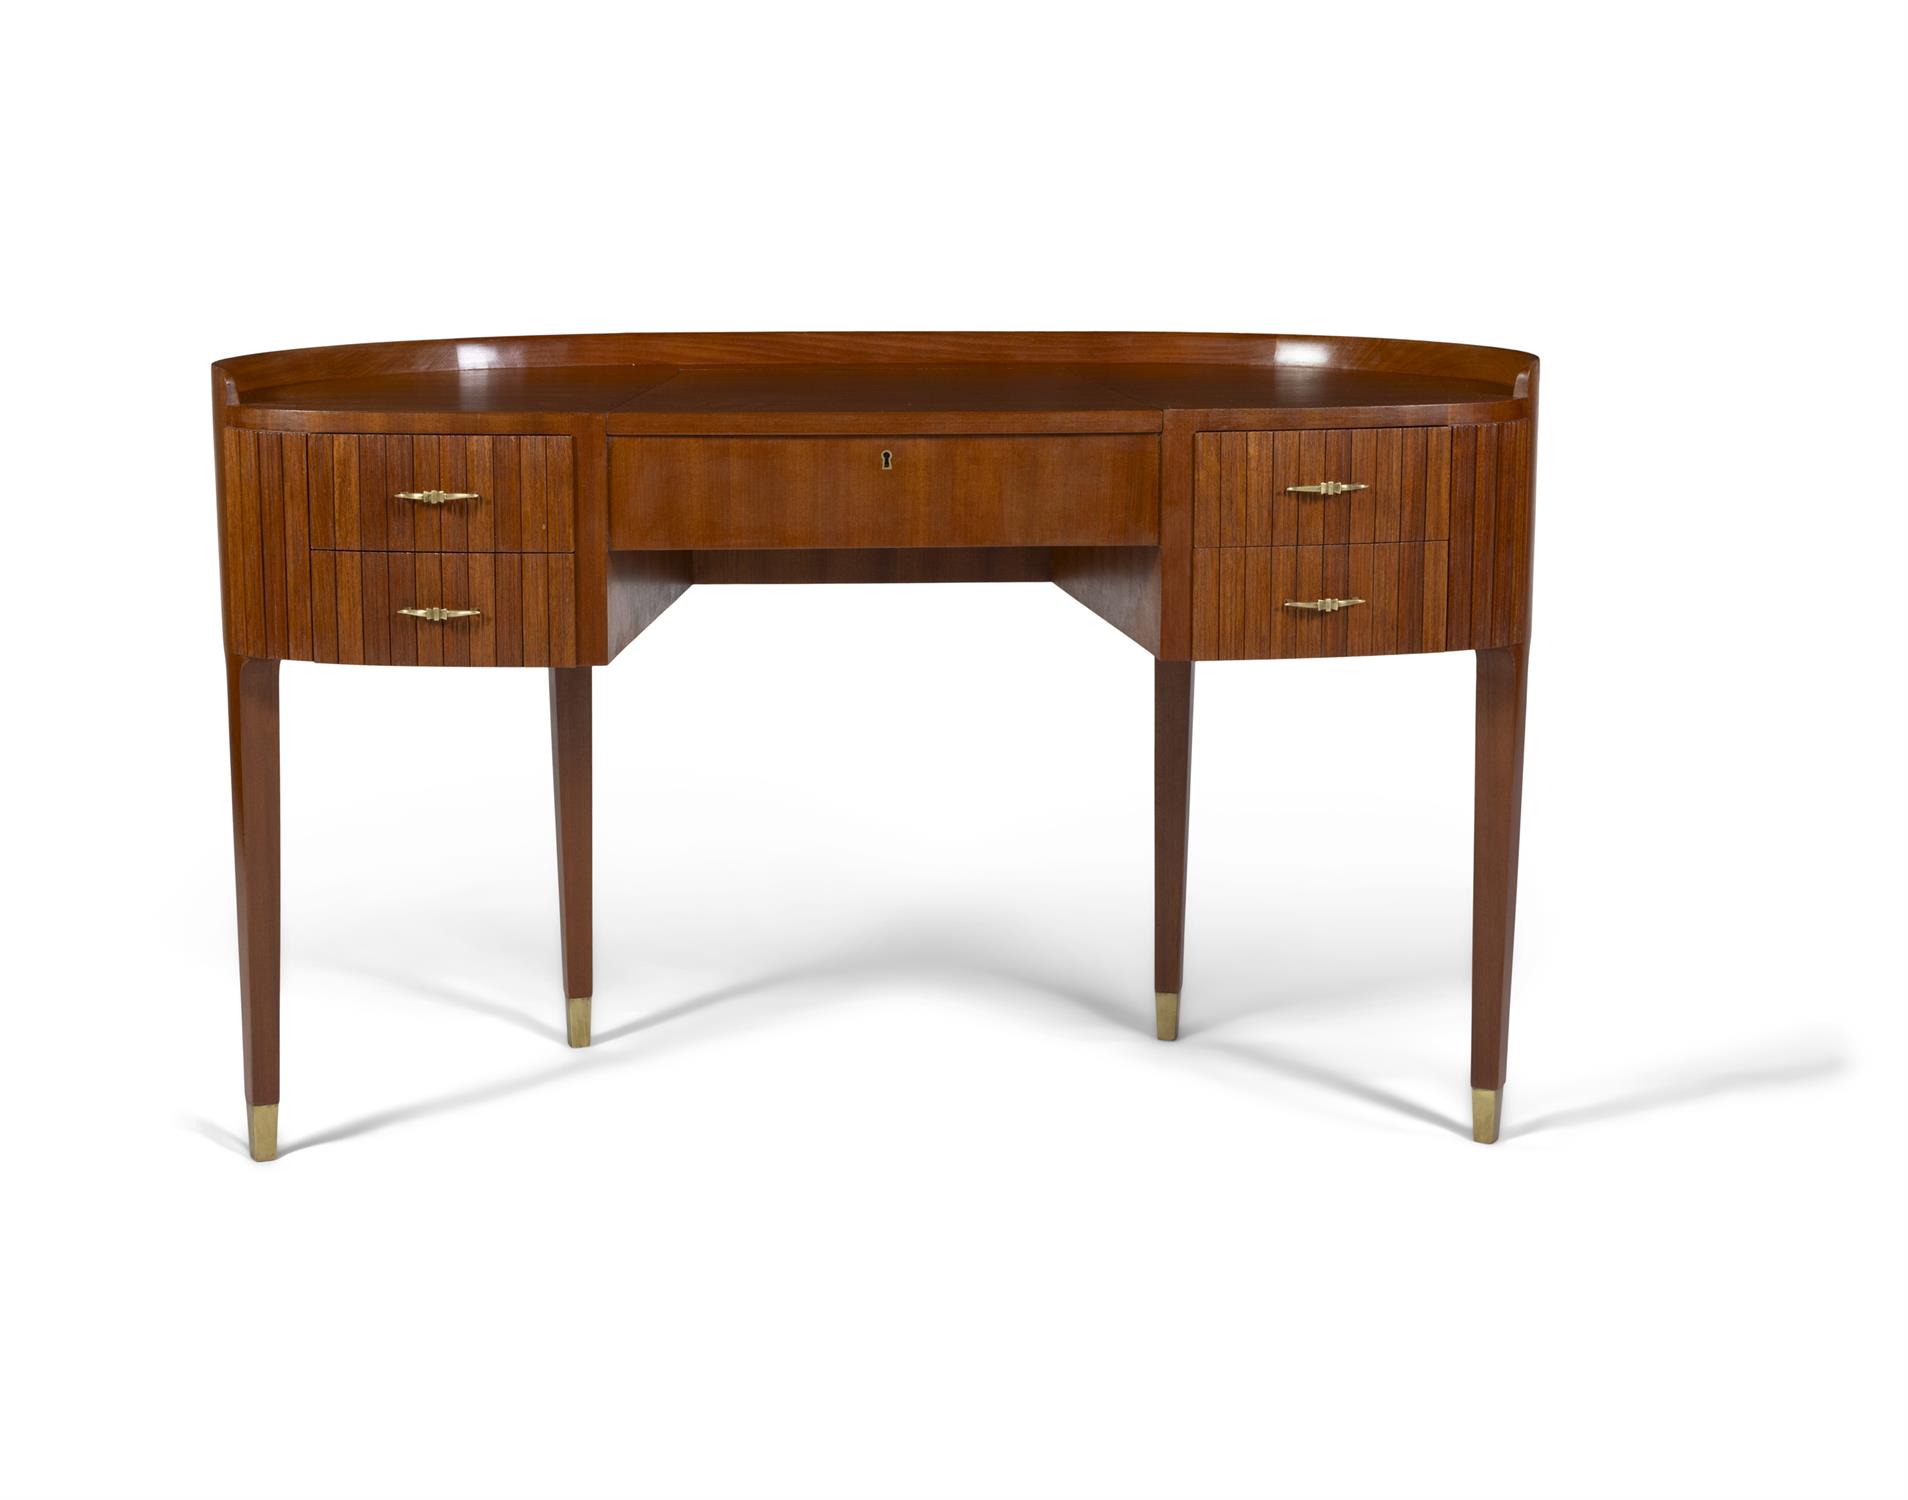 PAOLO BUFFA (1903 - 1970) A mahogany dressing table by Paolo Buffa for Ducrot with maple interior - Image 3 of 10